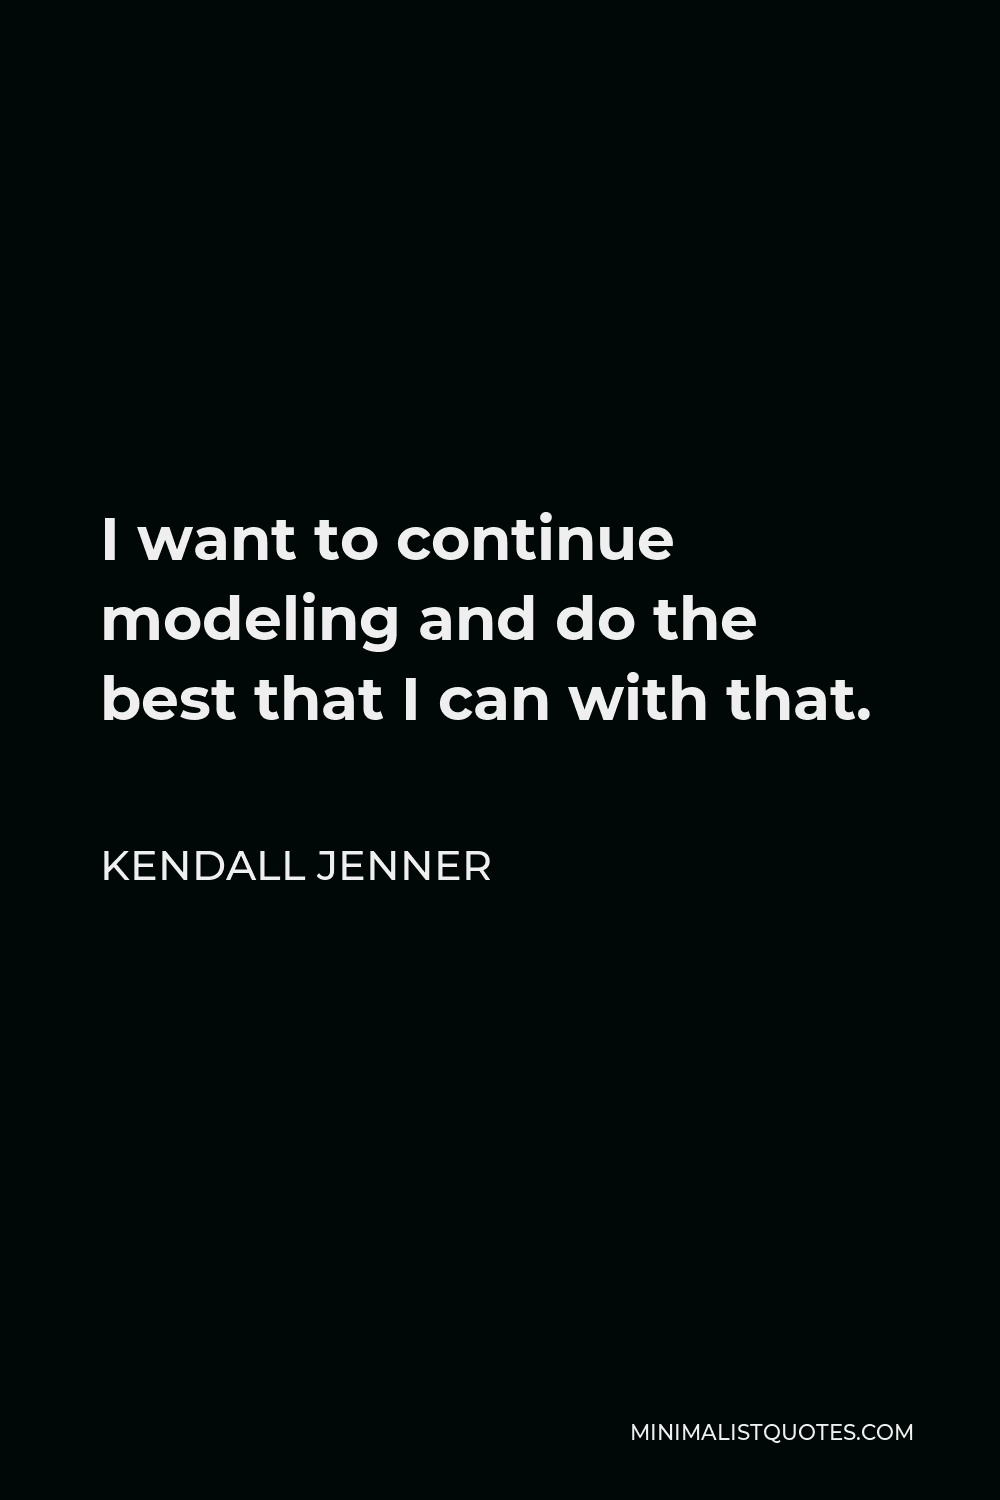 Kendall Jenner Quote - I want to continue modeling and do the best that I can with that.